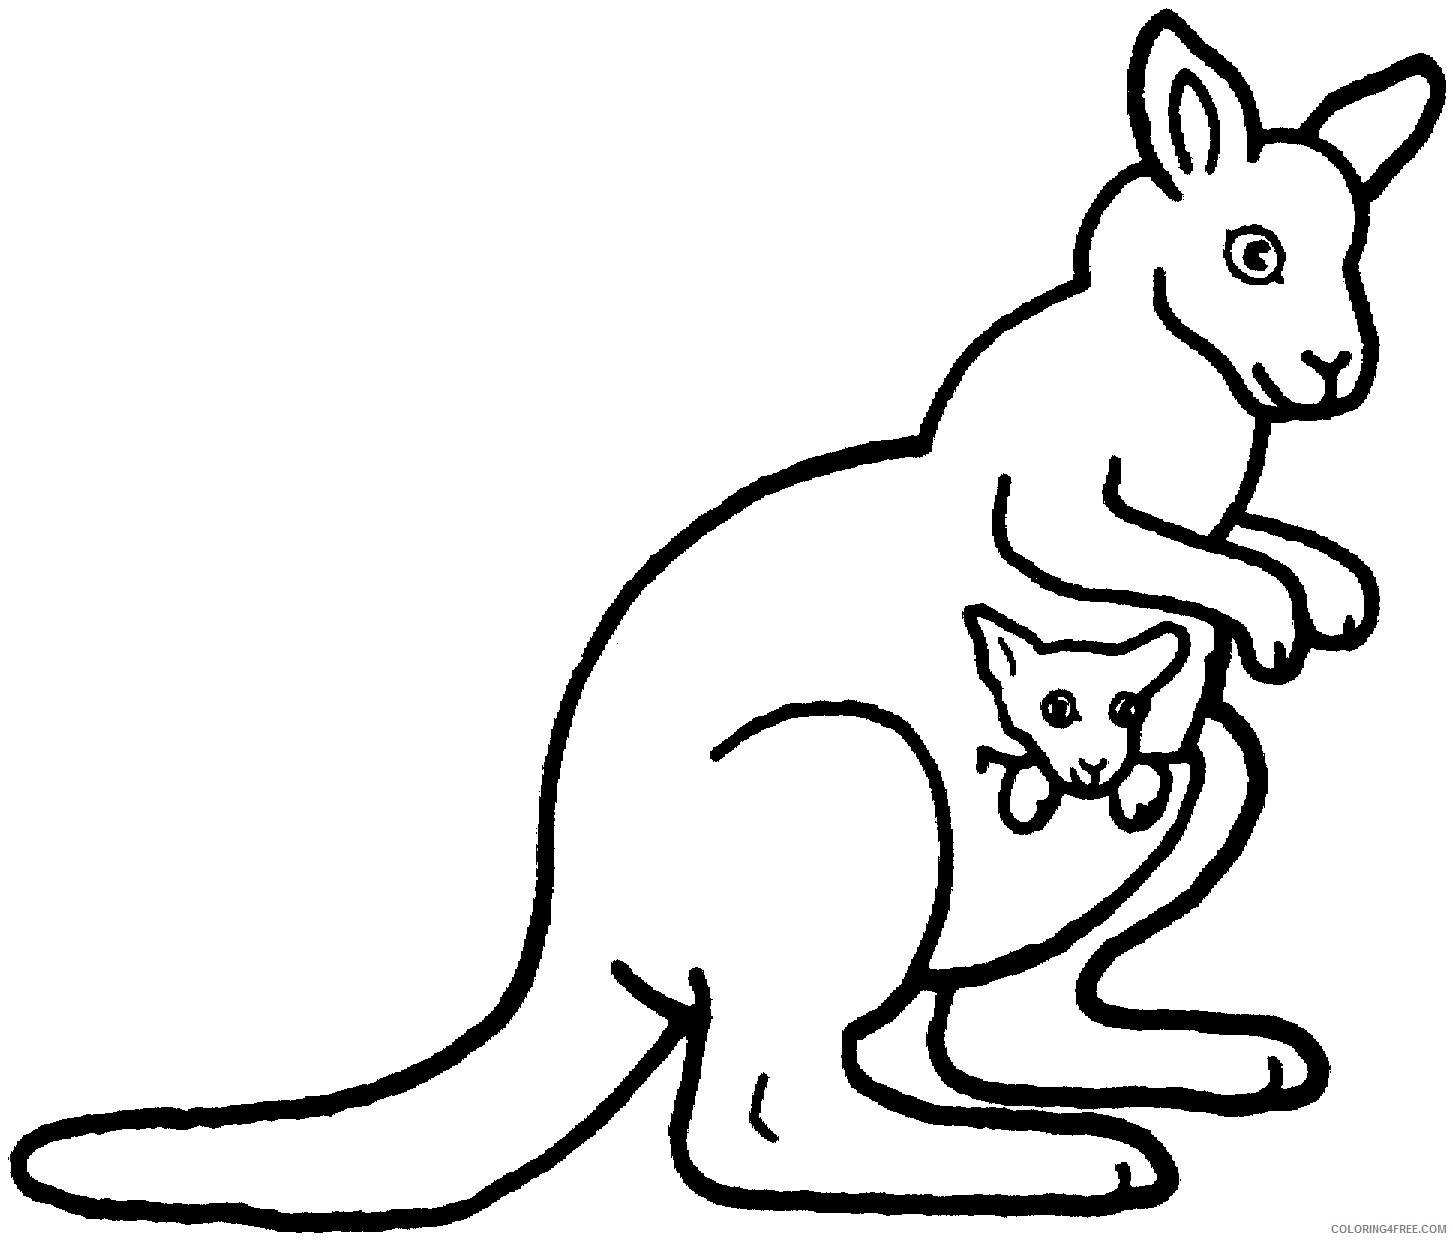 kangaroo coloring pages with joey Coloring4free